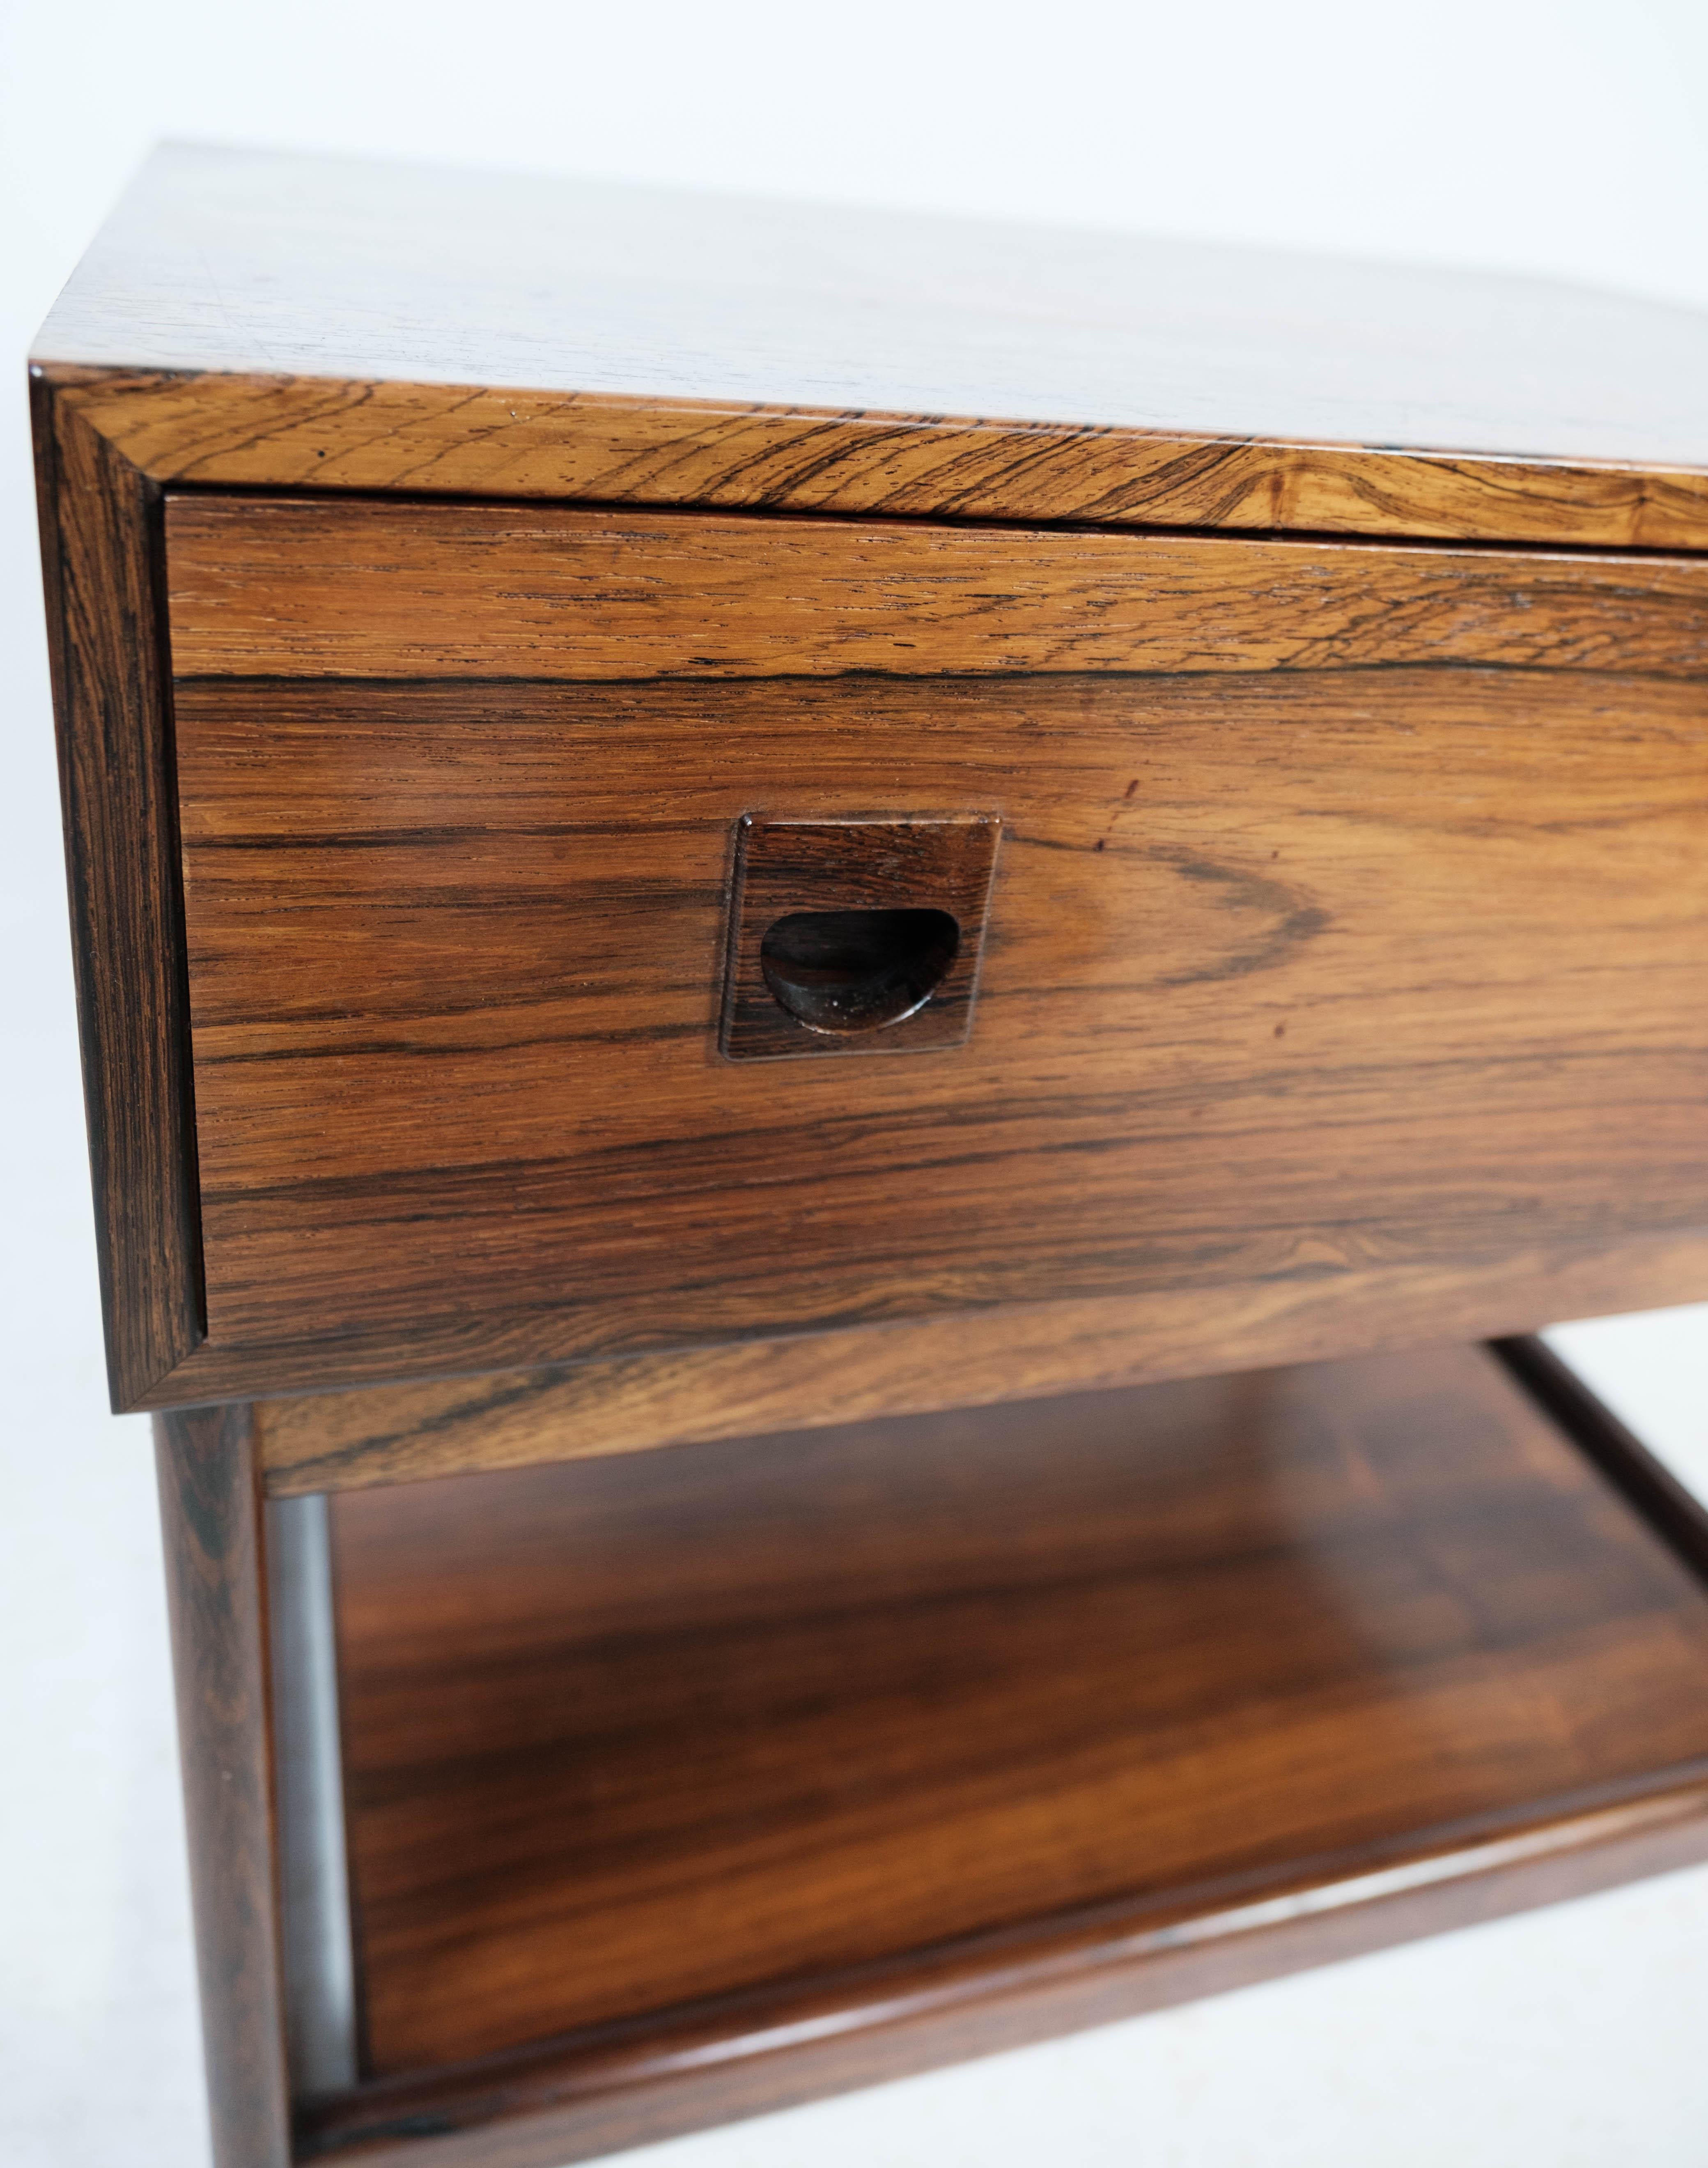 Scandinavian Modern Bedside Table in Rosewood of Danish Design Manufactured by Brouer in the 1960s